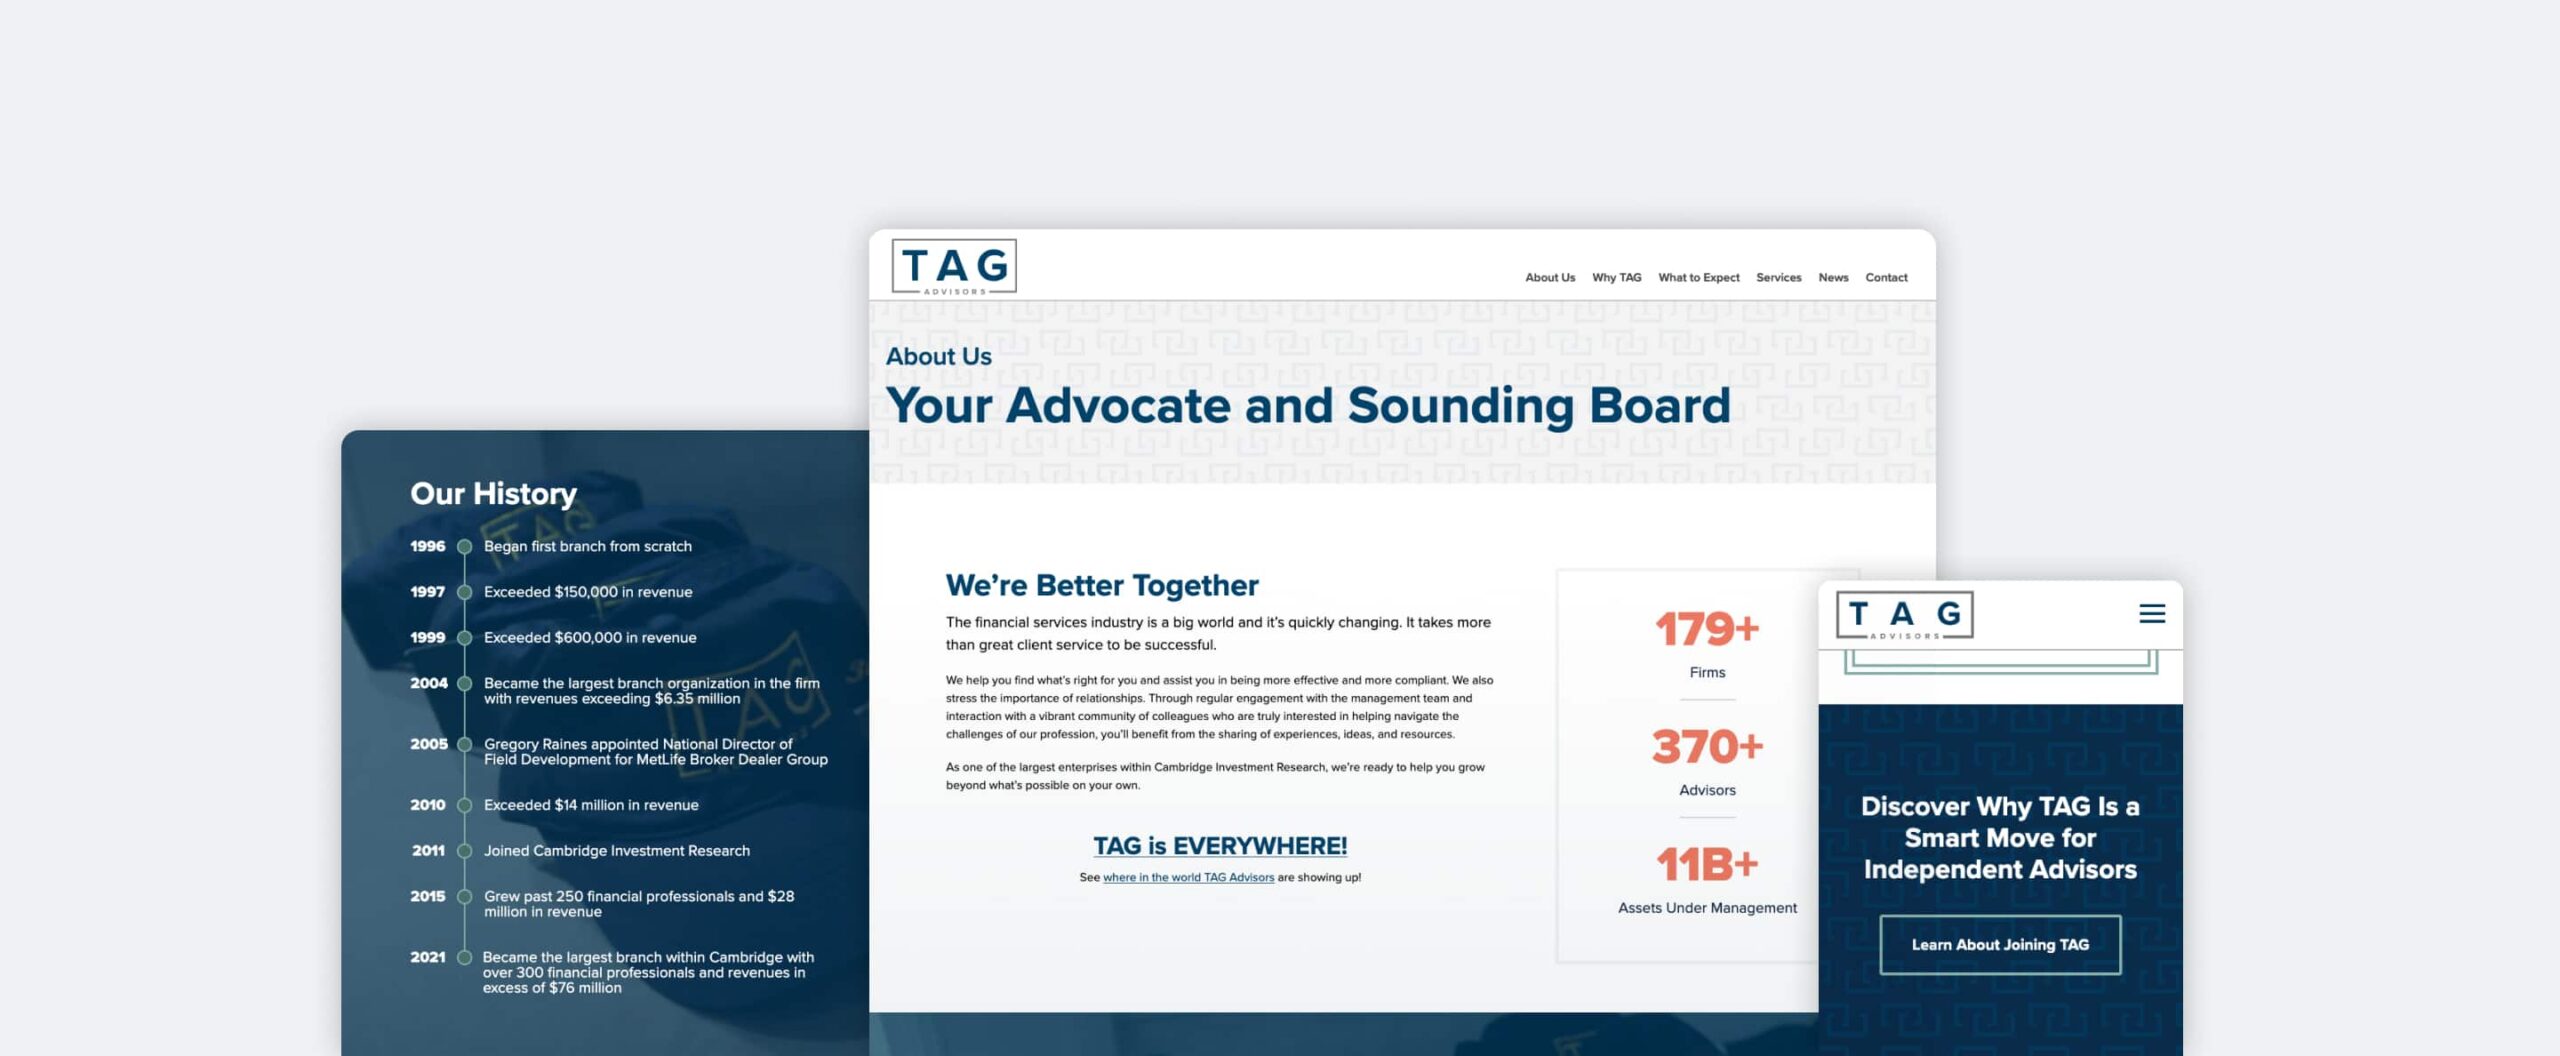 TAG Advisors website interface elements showing about us and history pages